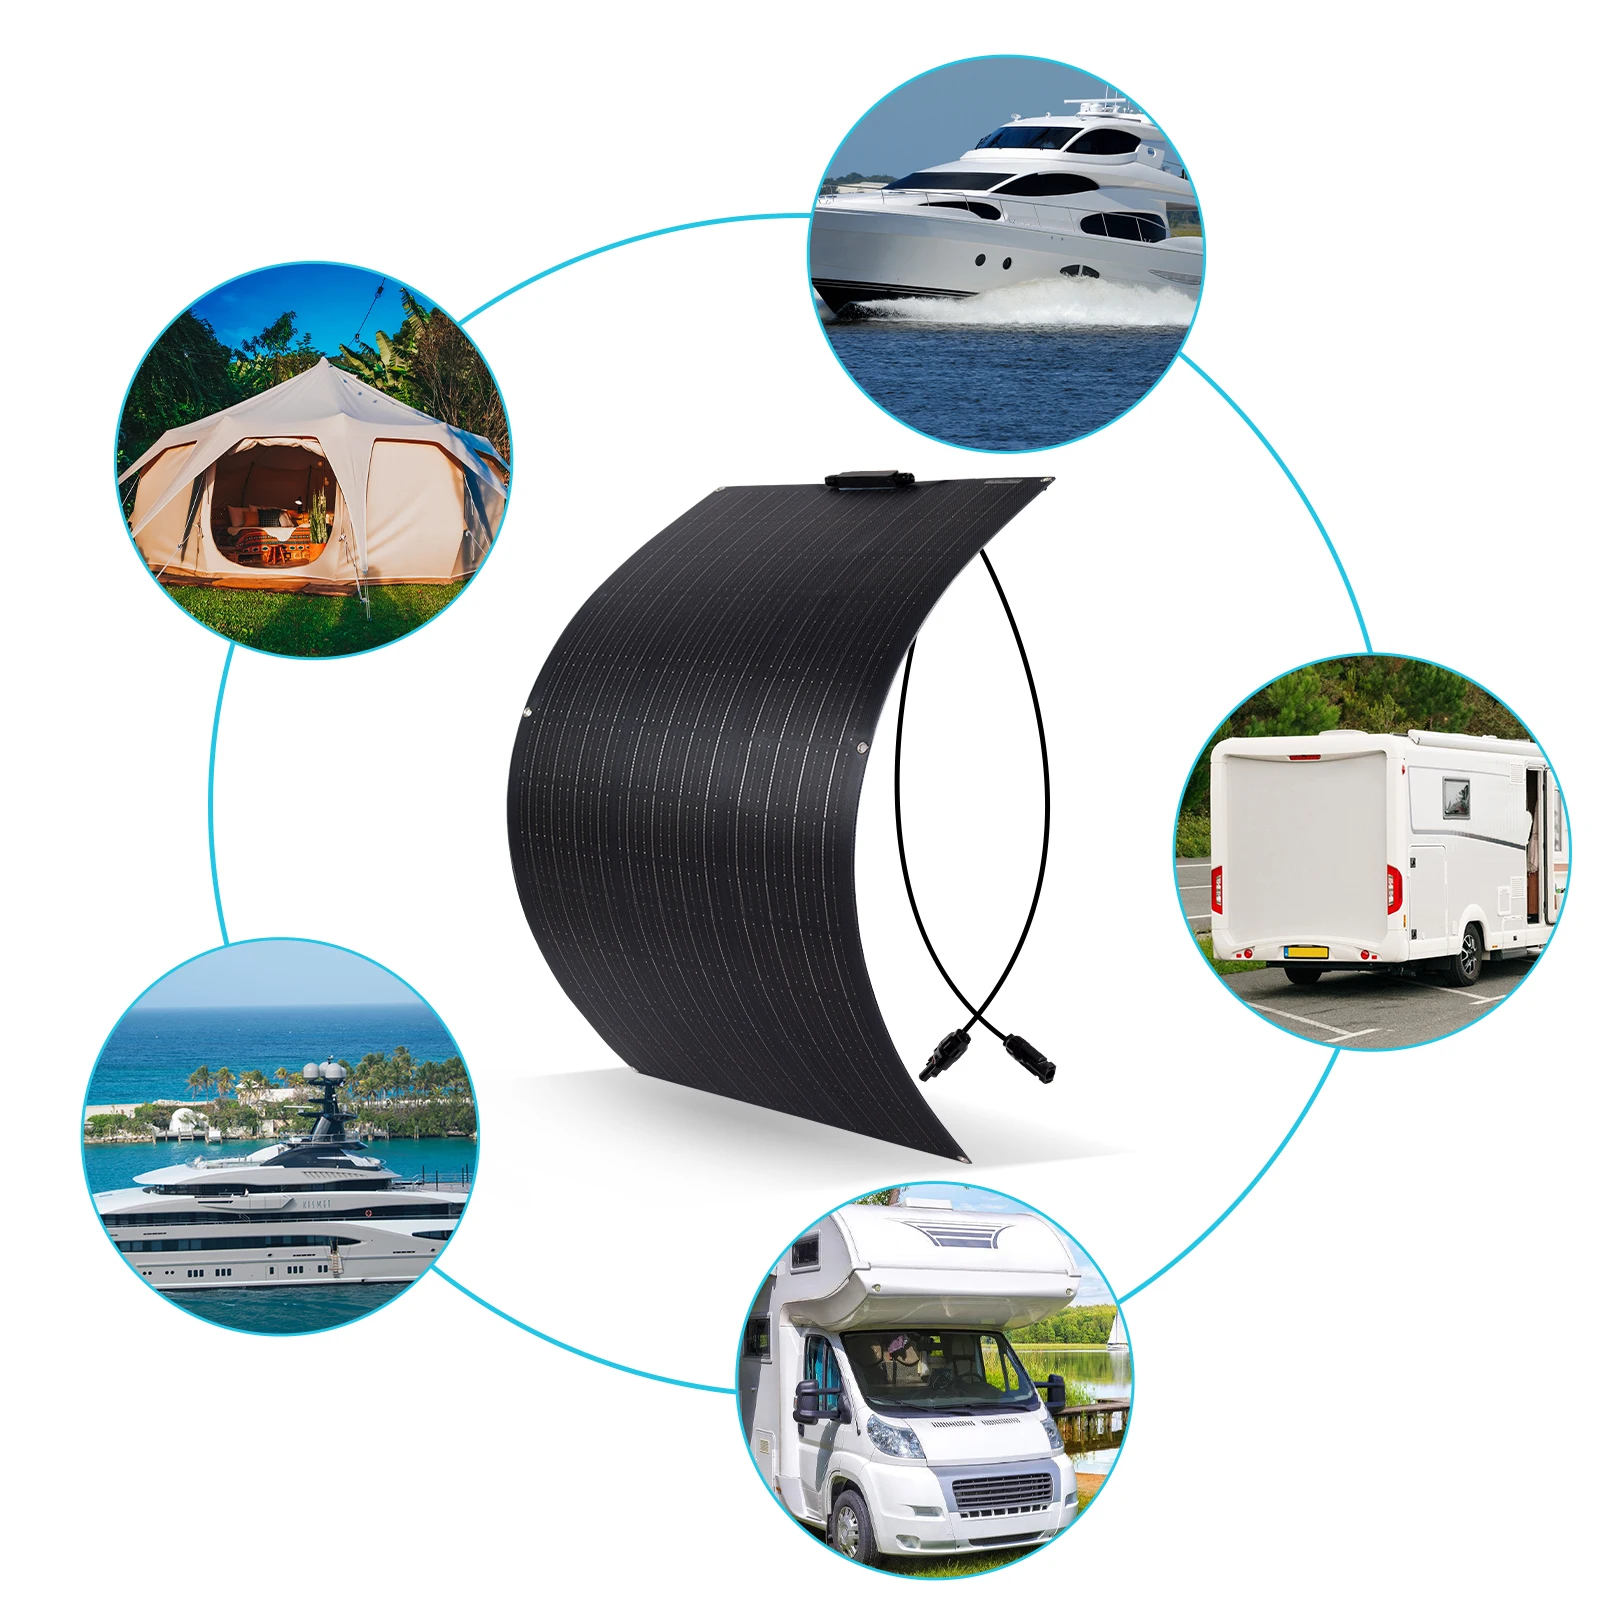 3000W Flexible Solar Panel  12V Outdoor Battery Charger tourism 1500W Solar cell kit  For home Phone Camping Boat  Yacht 220v